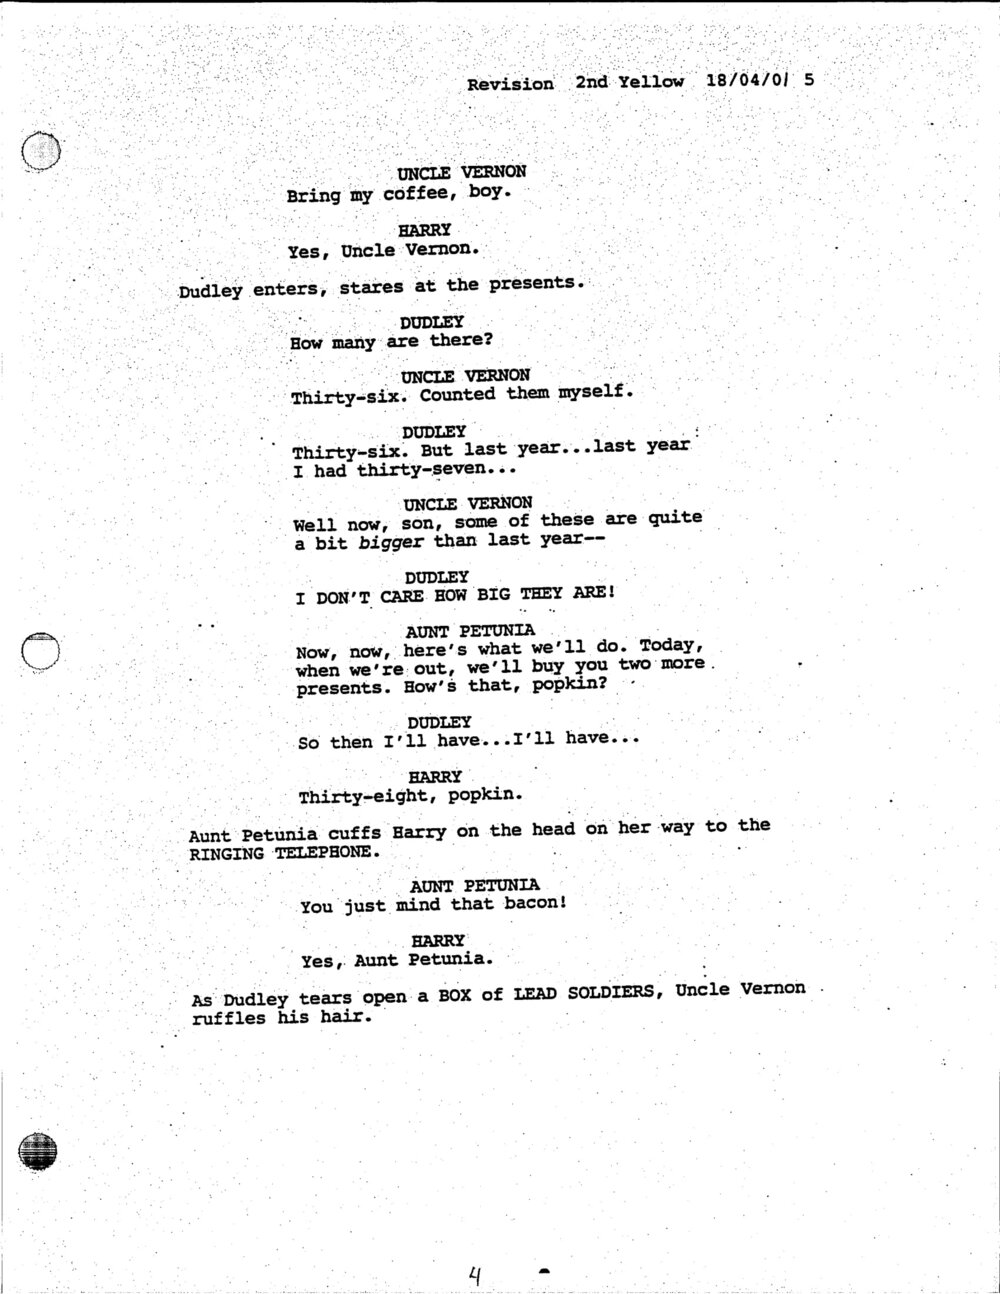 More conversation in Privet Drive before the Zoo - Script Page 5.jpg